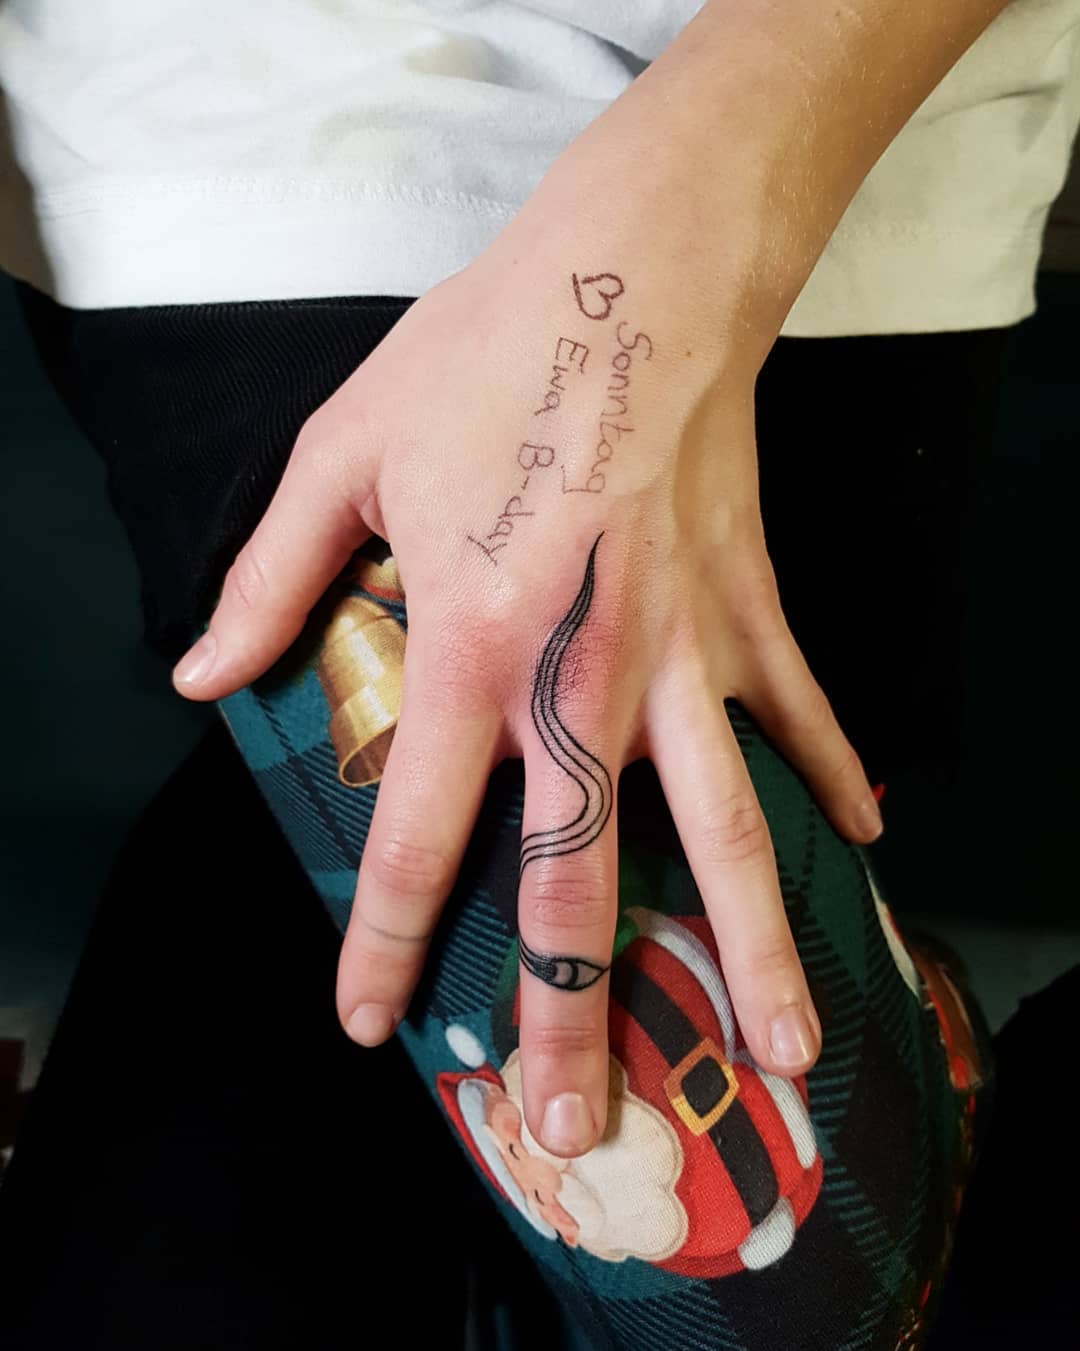 Cute snake tattoo on the middle finger